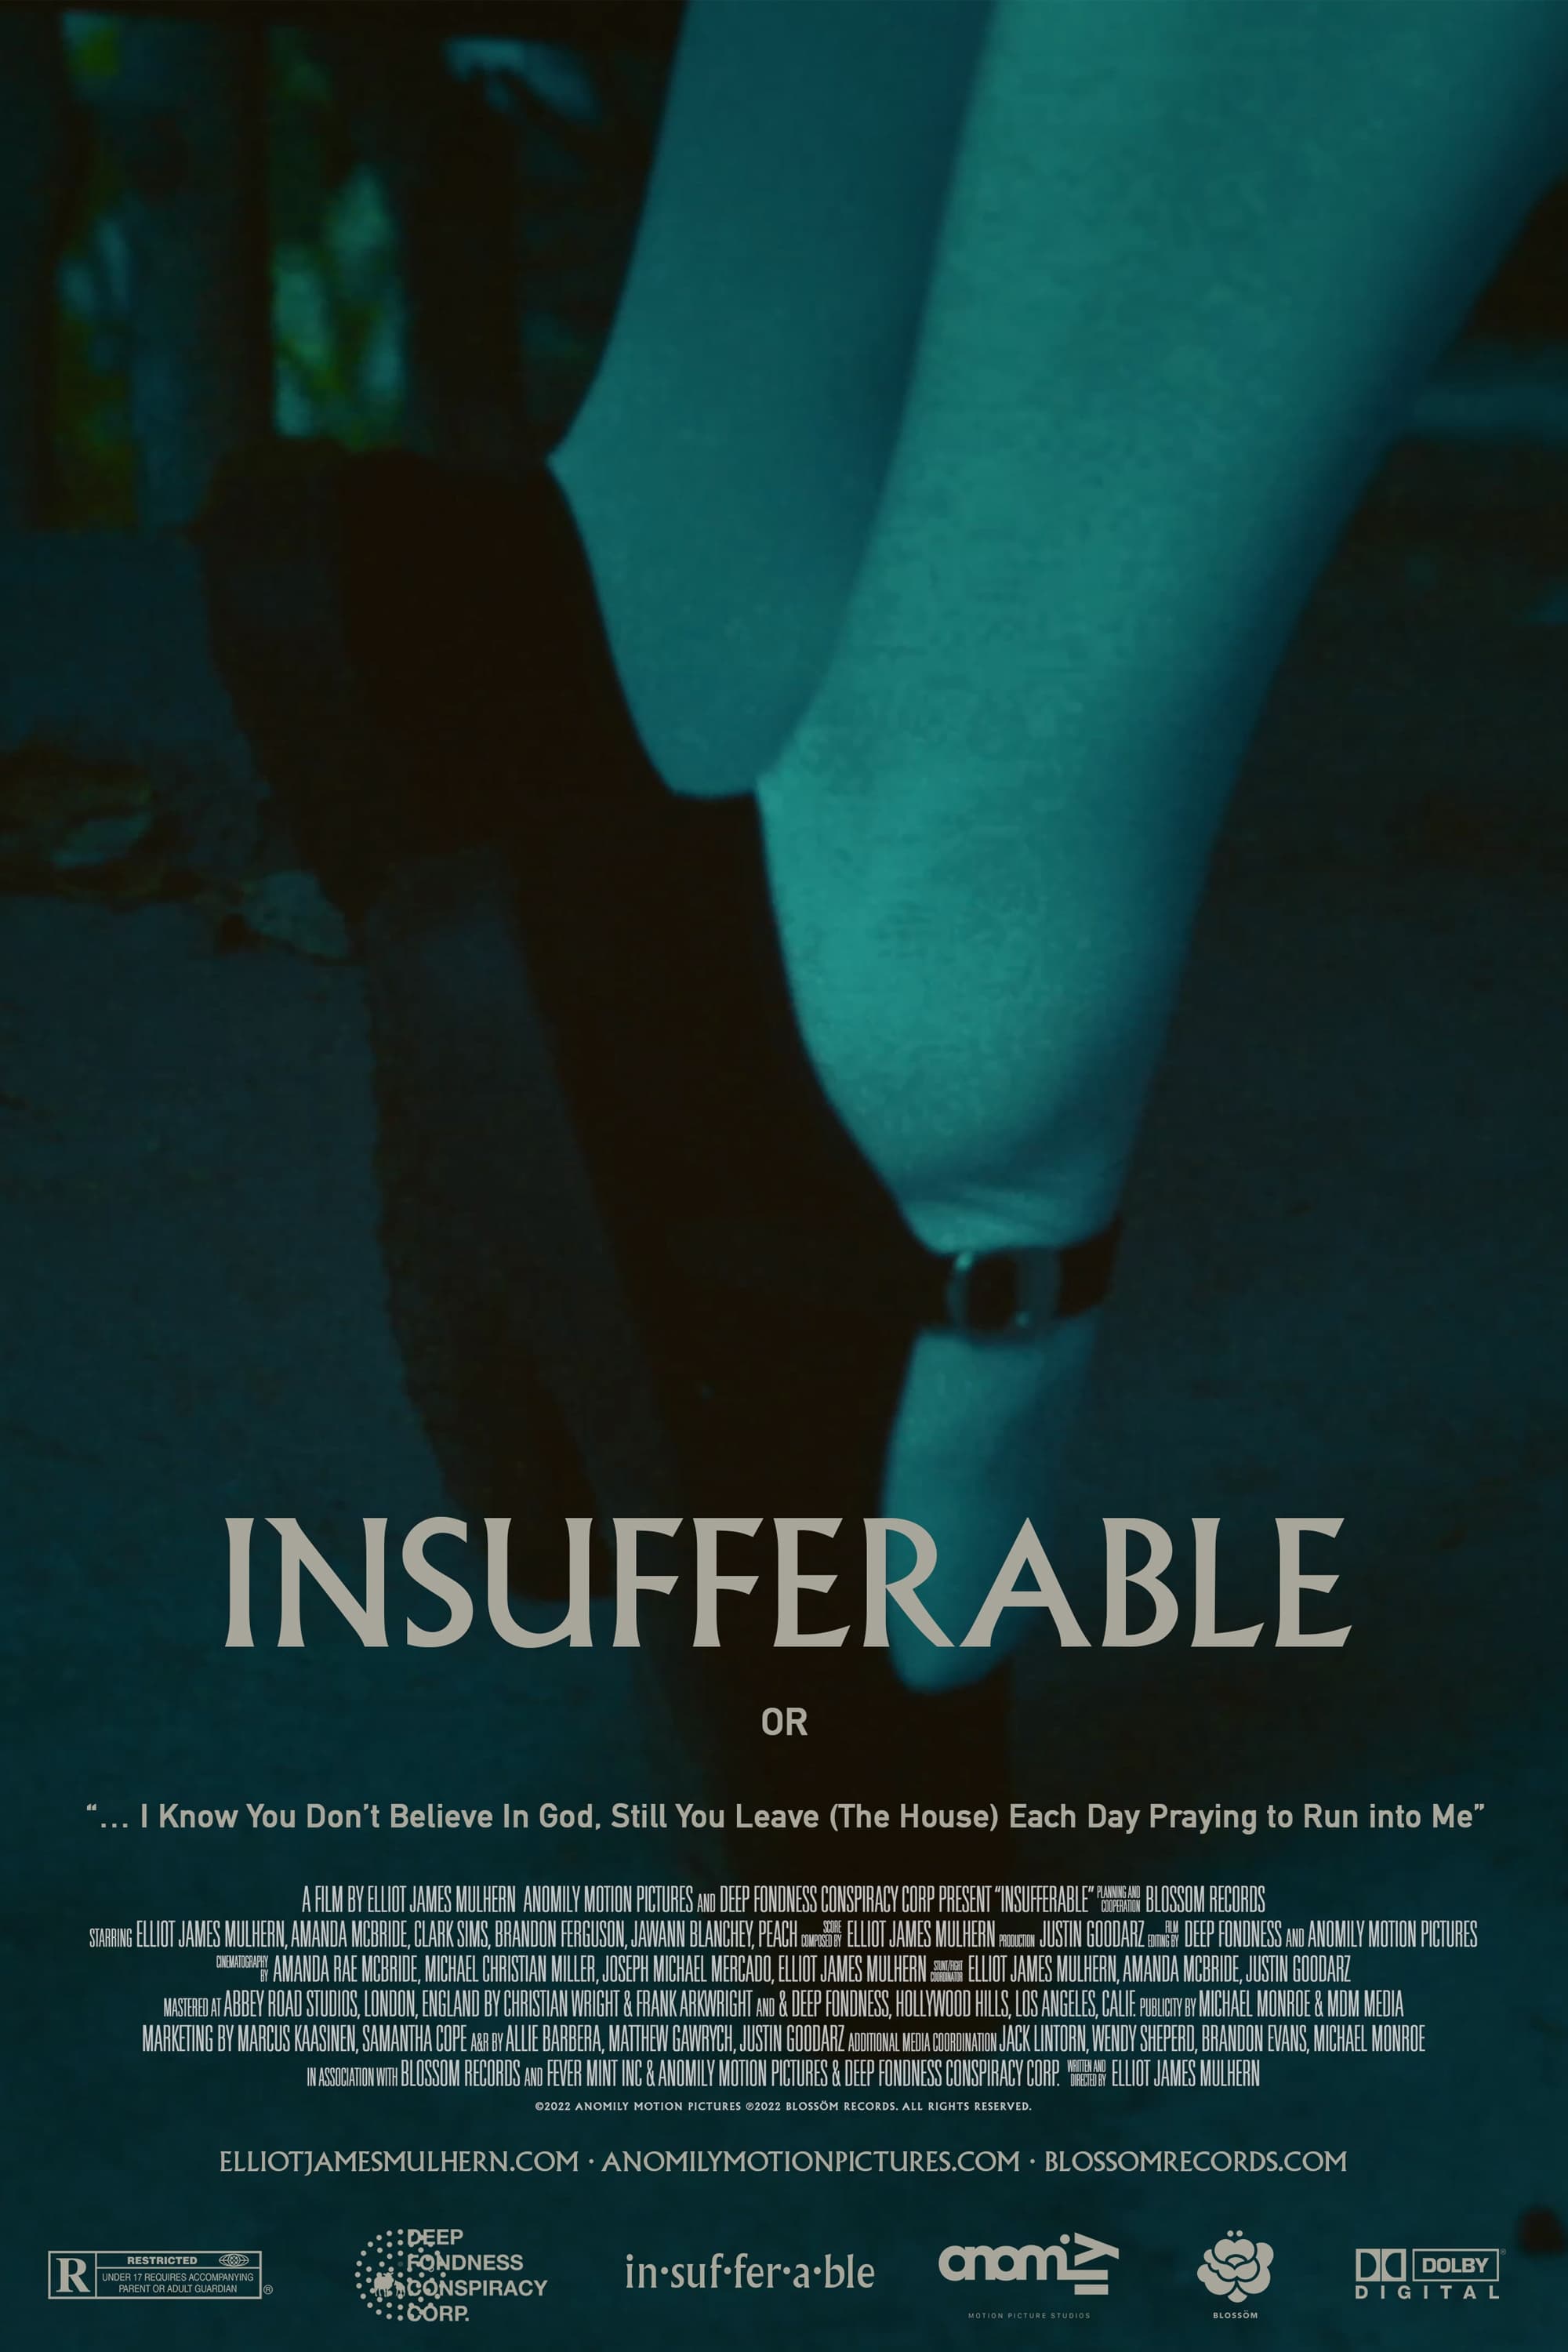 INSUFFERABLE or "... I Know You don't believe In God Still You Leave (The House) Each Day Praying To Run Into Me"